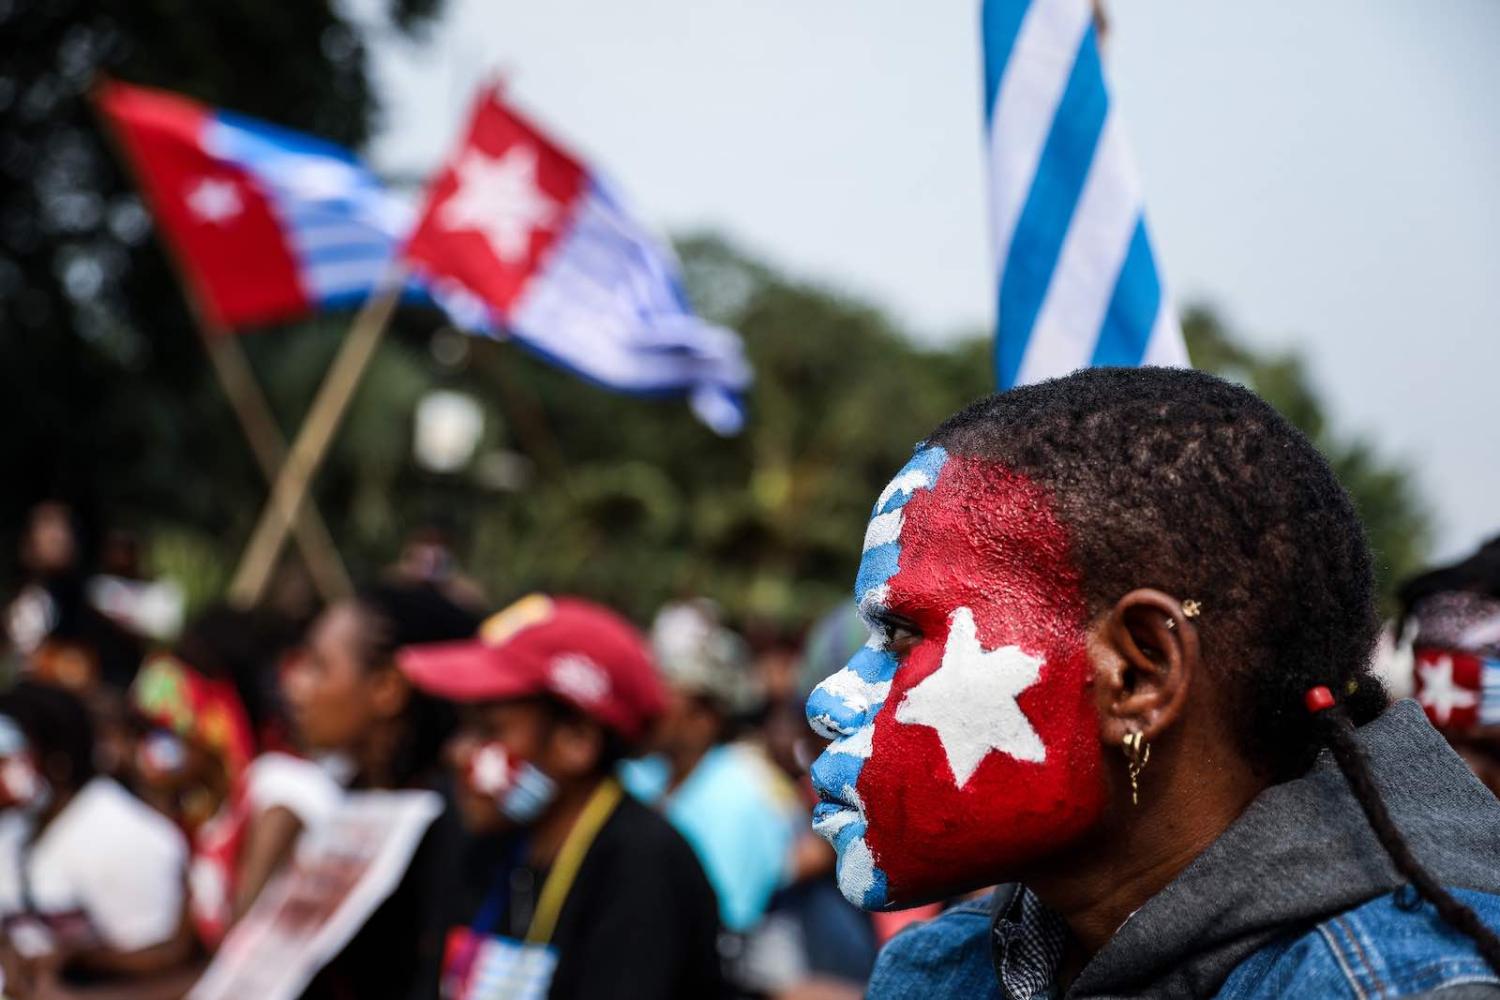 A woman with her face painted with the flag of West Papua, at a rally in Jakarta, Indonesia, 28 August 2019 (Andrew Gal/NurPhoto via Getty Images)